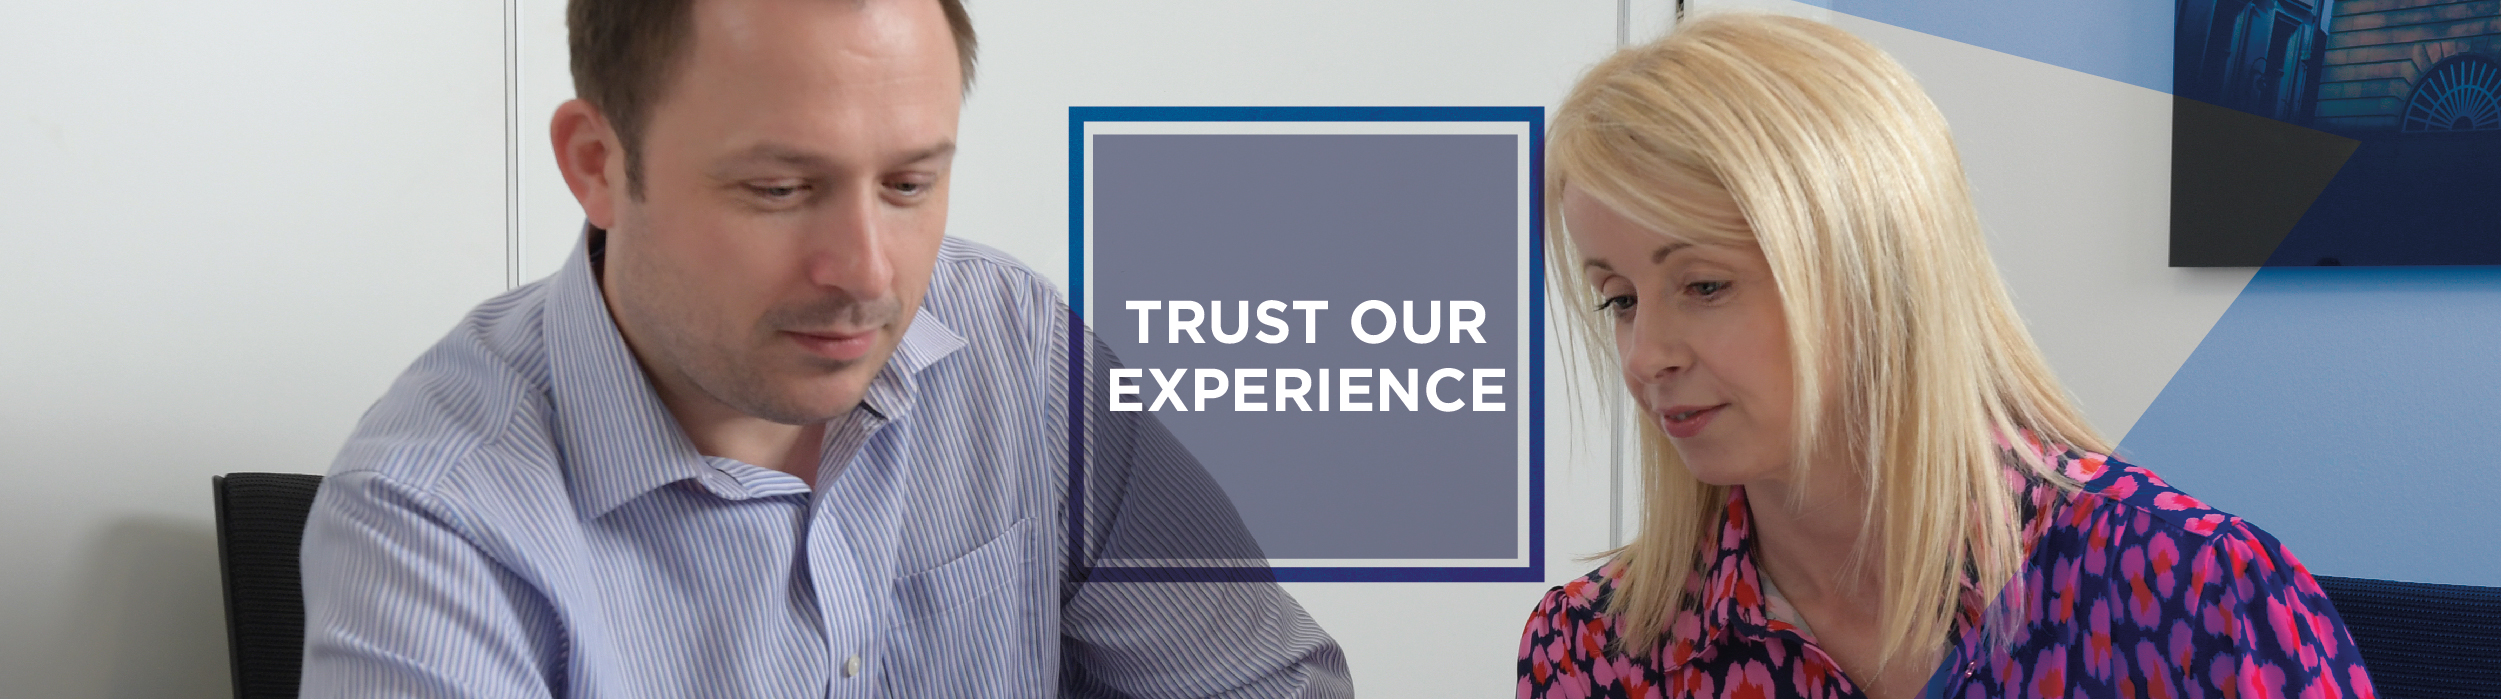 Trust Our Experience